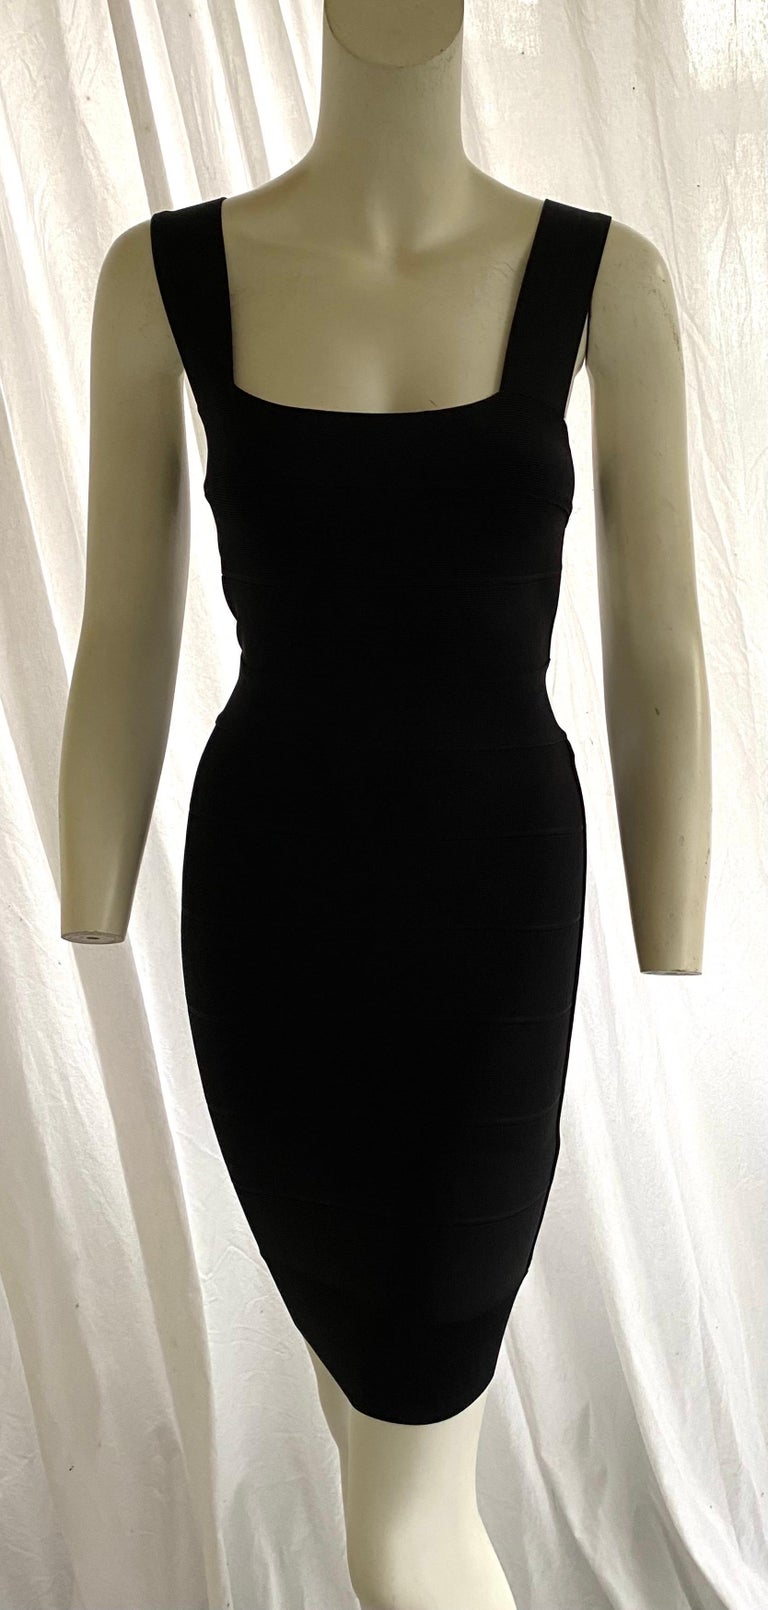 Lovely Herve Leger bandage dress

Size small

Excellent condition we lightened some pics to show detail but this is a true rich black

Short zip up the back

Cross cross

Straps in back

Law Roach says Herve is having a moment and we agree !
This